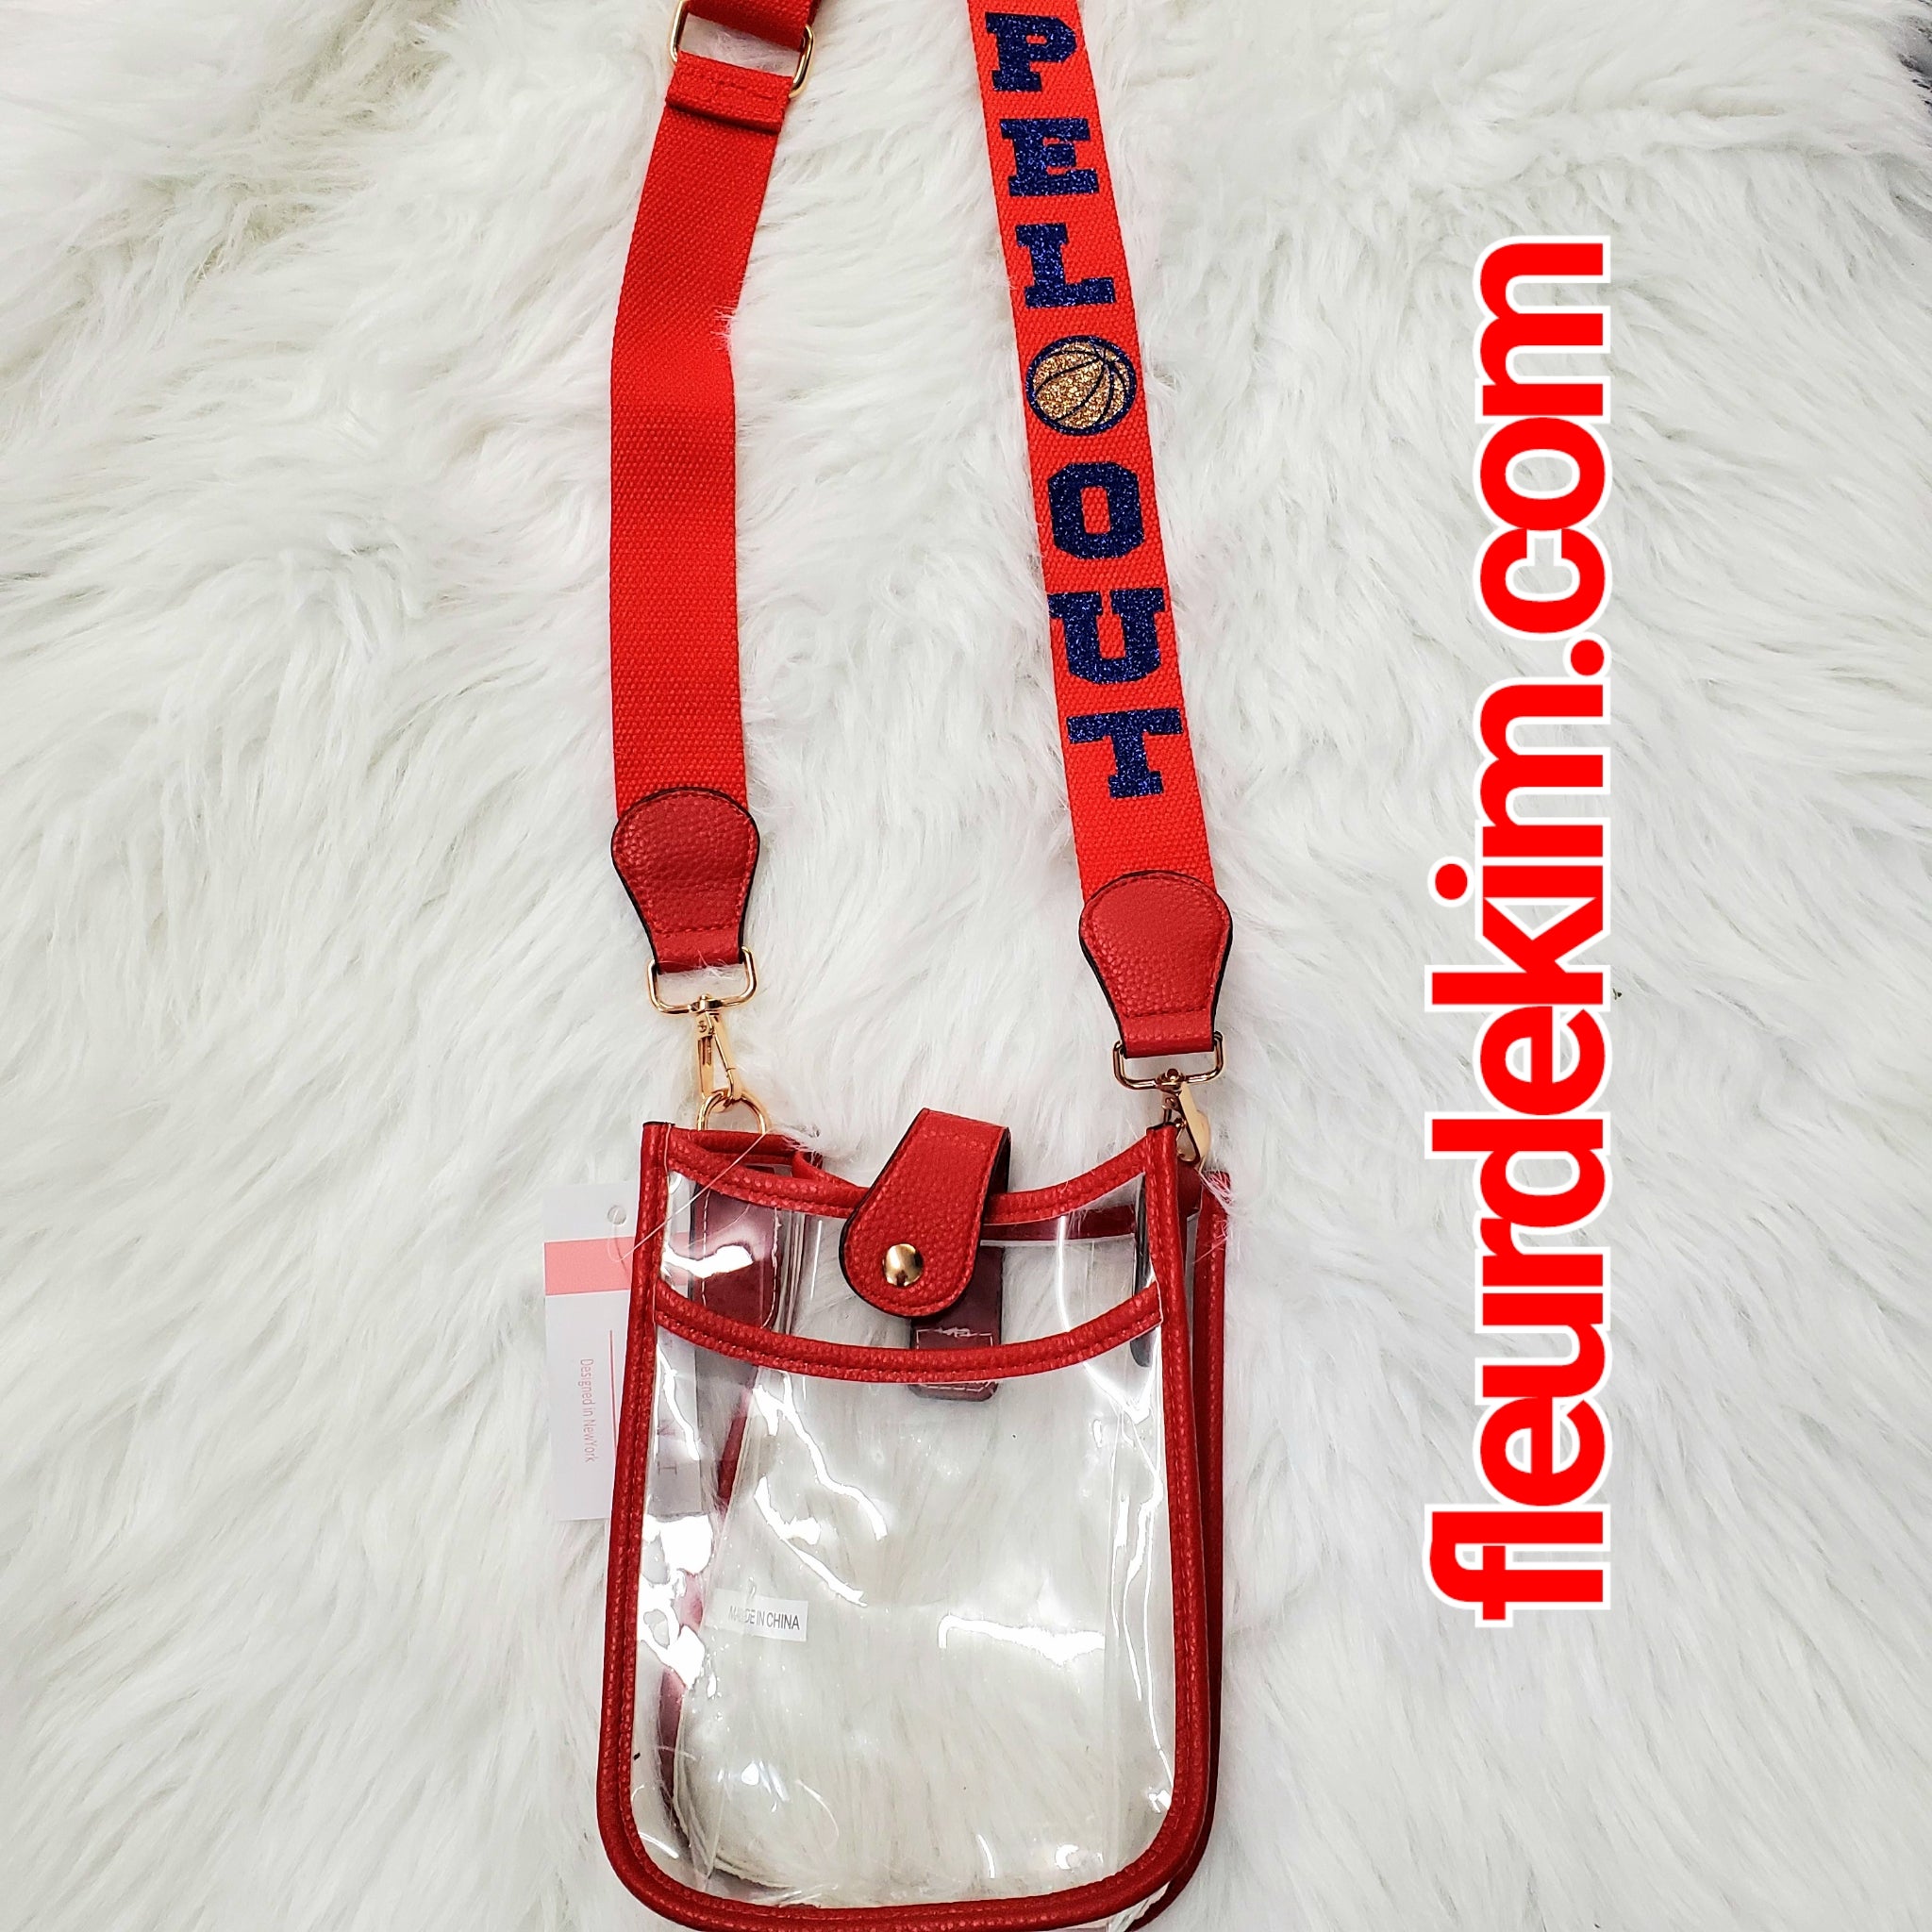 Pel Out red/blue/gold crossbody bag with straps (no zippers)